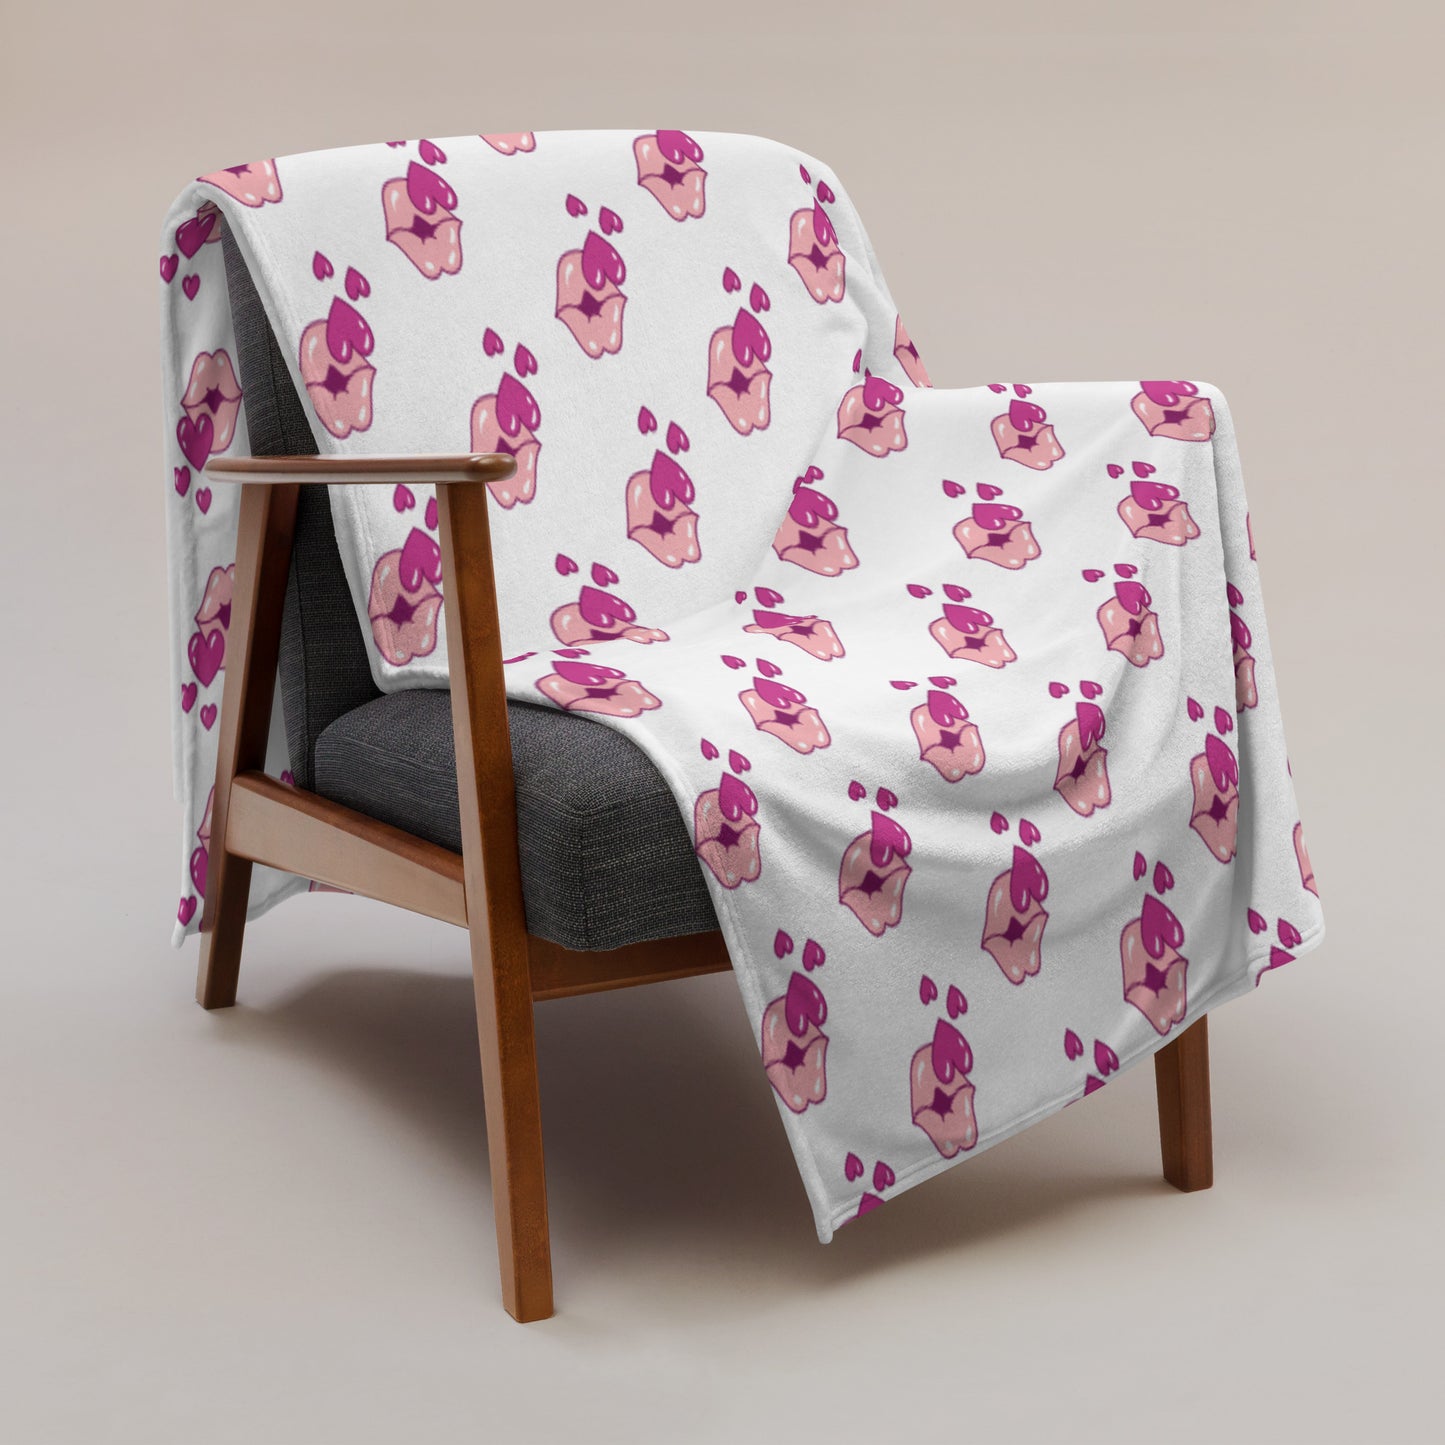 Soft-Touch Throw Blanket: Lips and Hearts